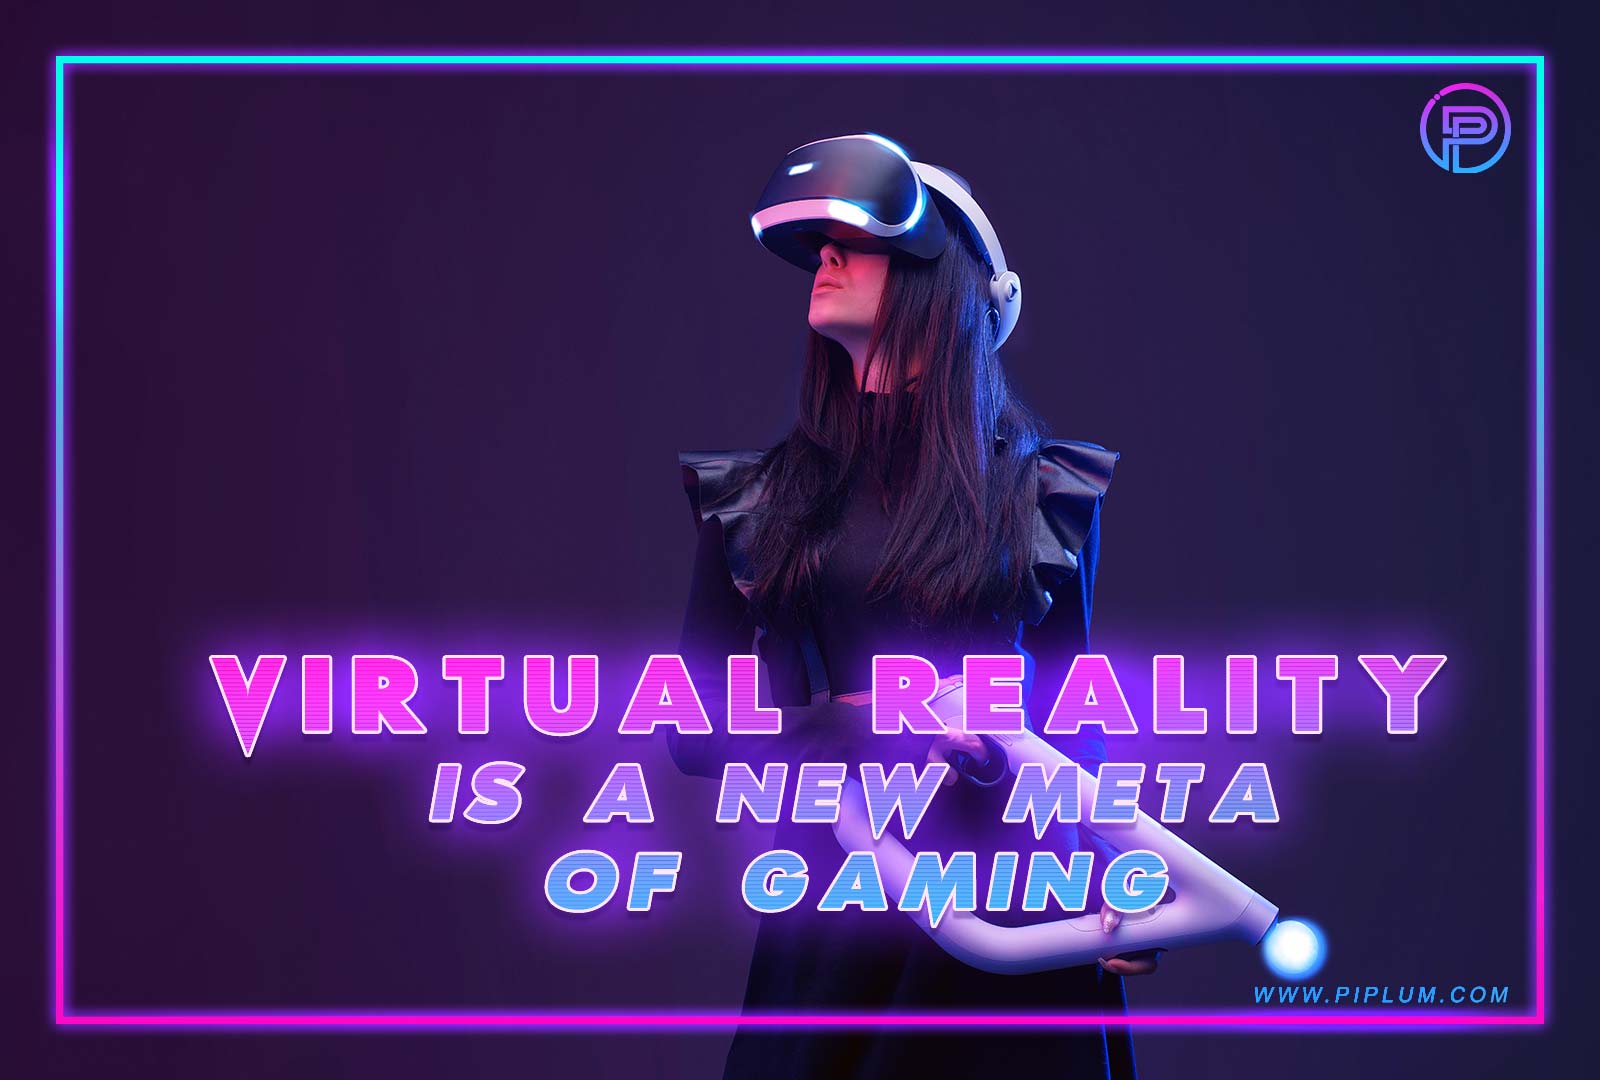 Virtual reality is a new meta of gaming. Inspirational gamers quote by Piplum. 